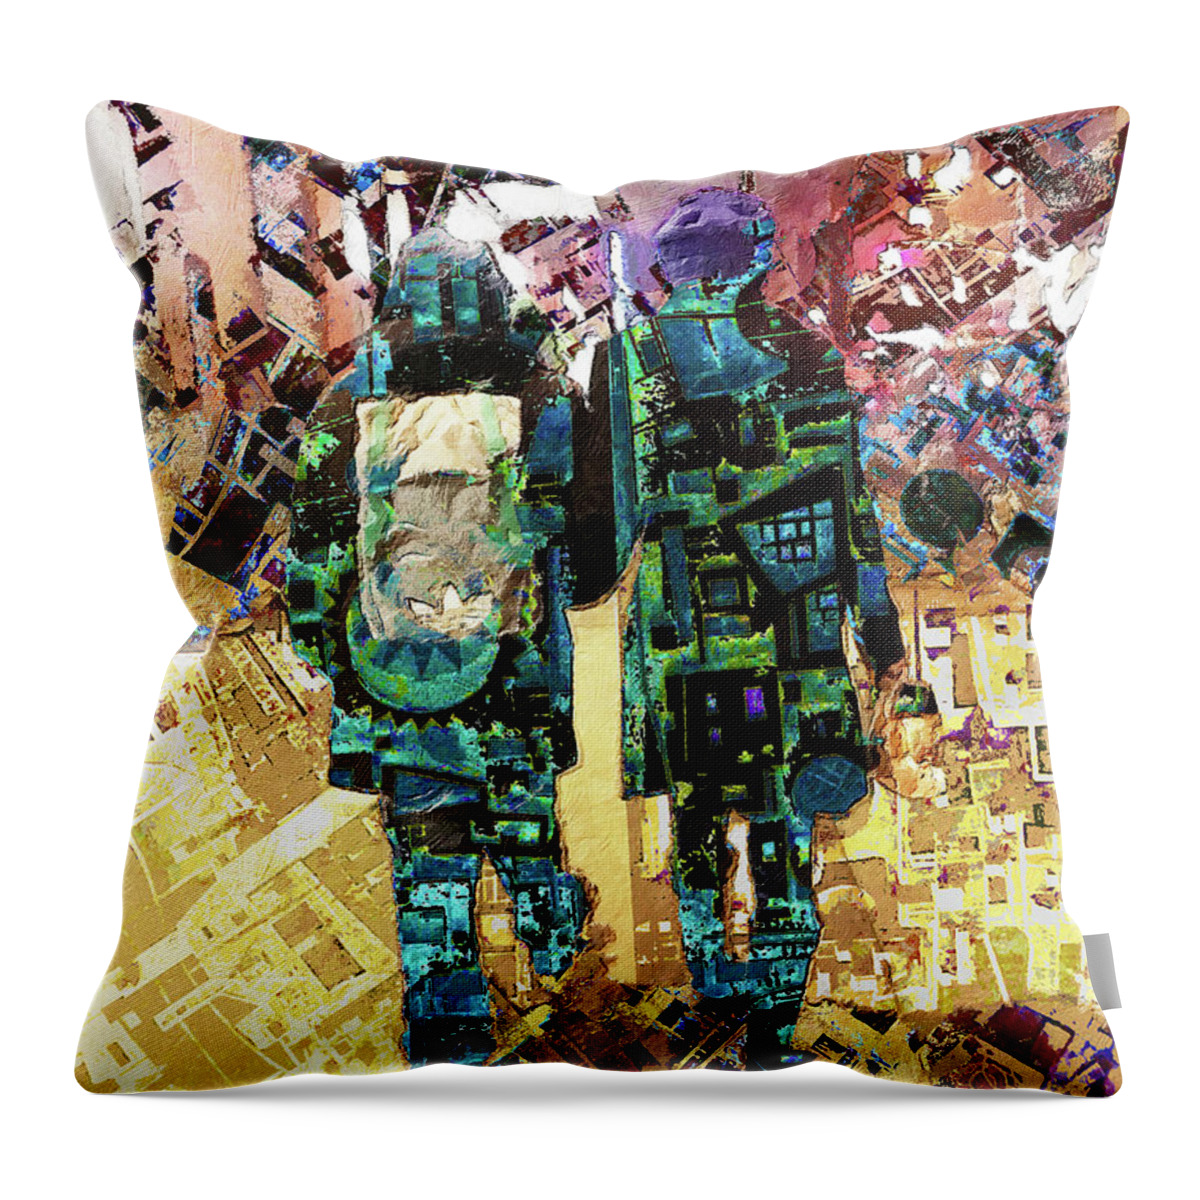 Walk Throw Pillow featuring the painting Together by Tony Rubino